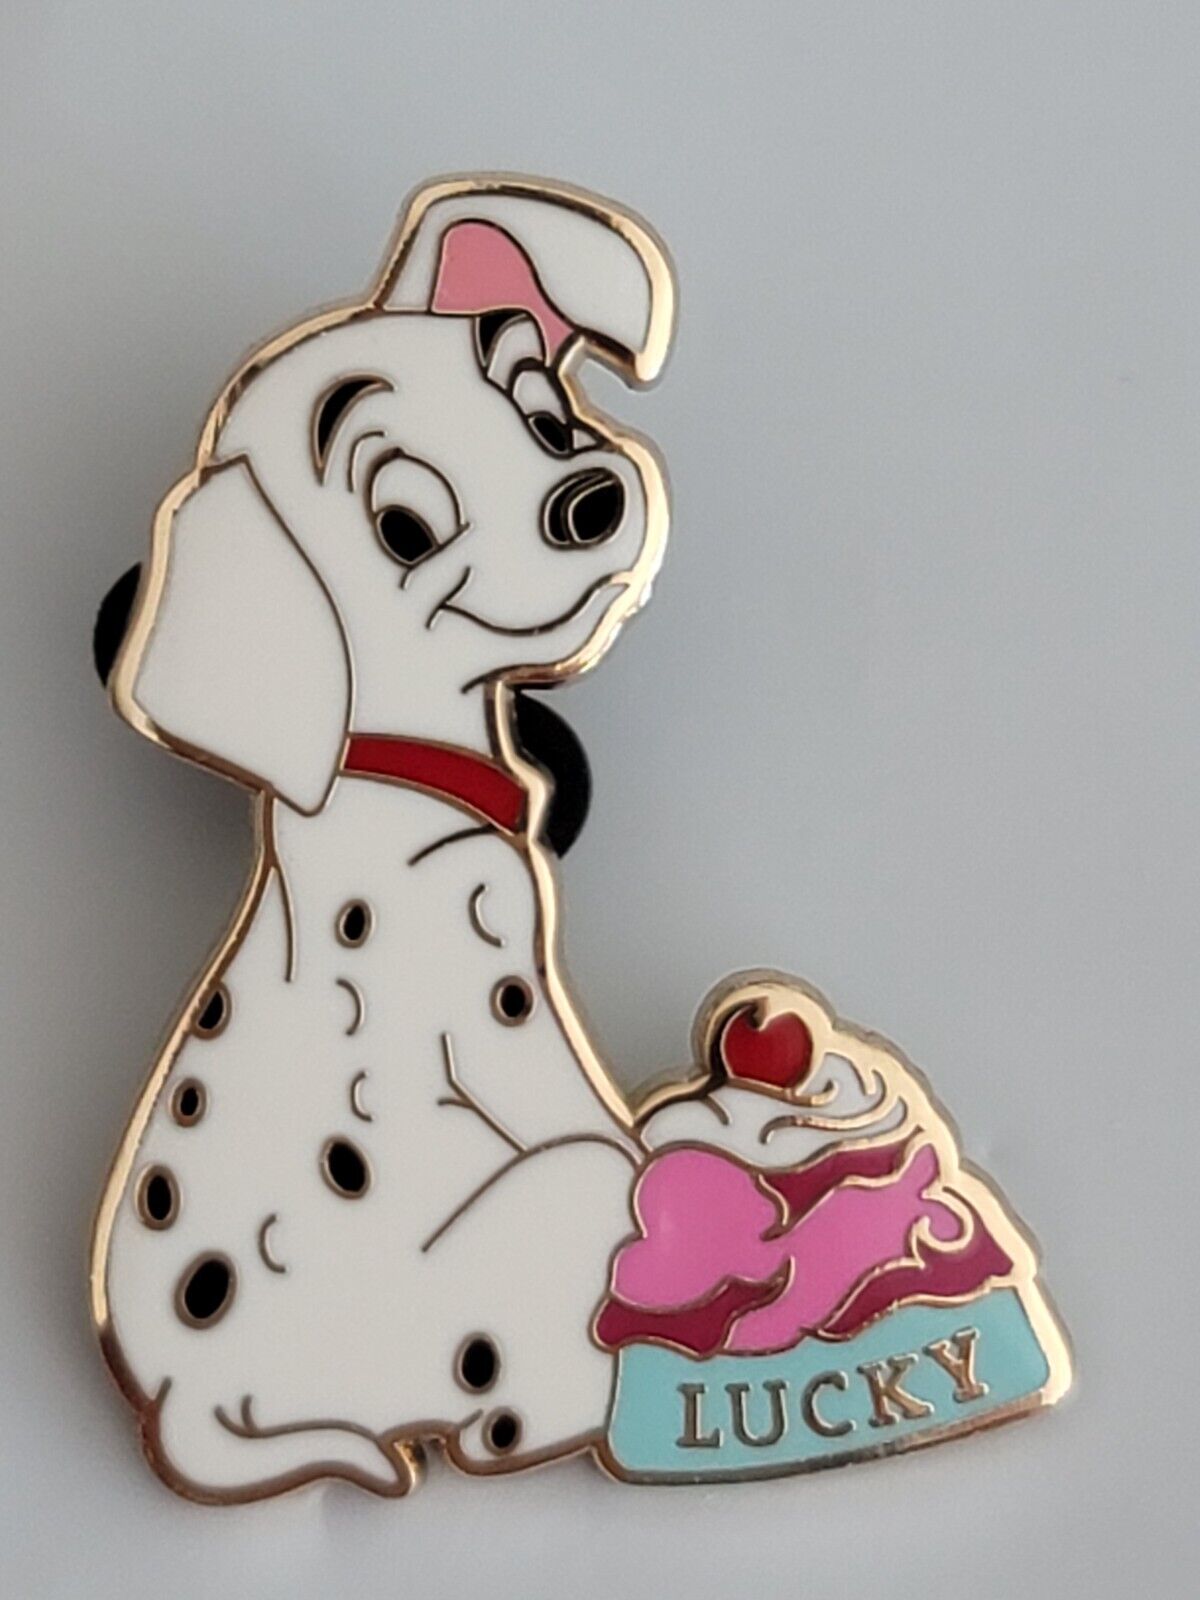 Disney Pin 101 DALMATIONS LUCKY DOG WITH Ghiradelli ICE CREAM 1 PIN AS SHOWN